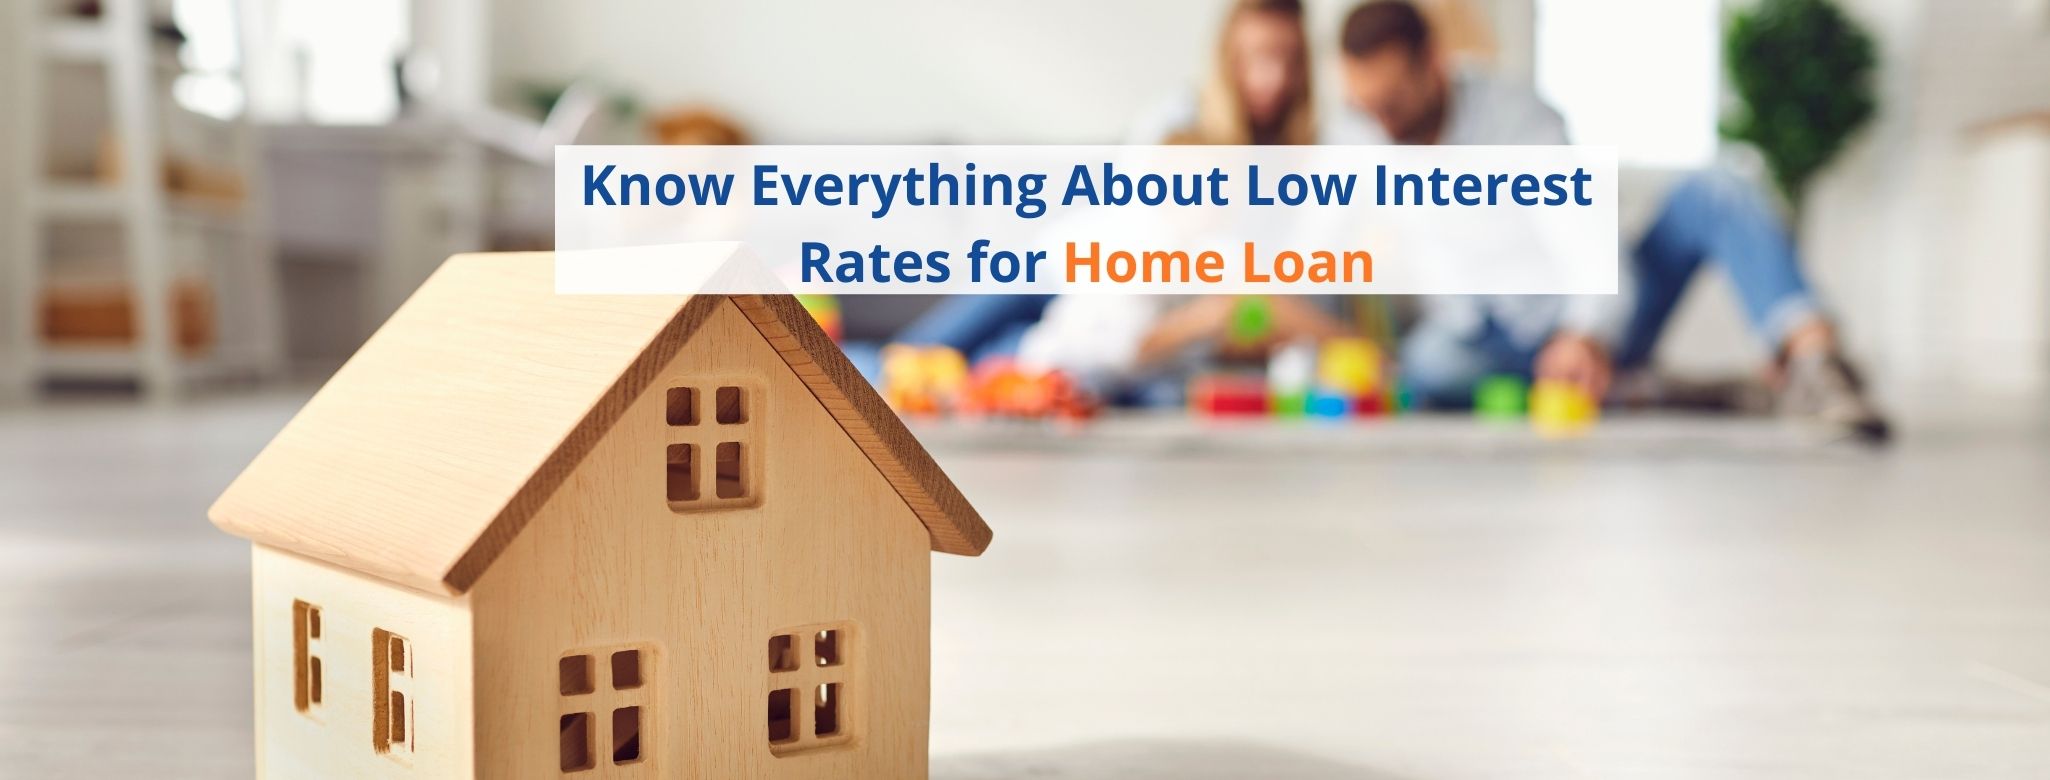 Know Everything About Low interest rates for home loans 